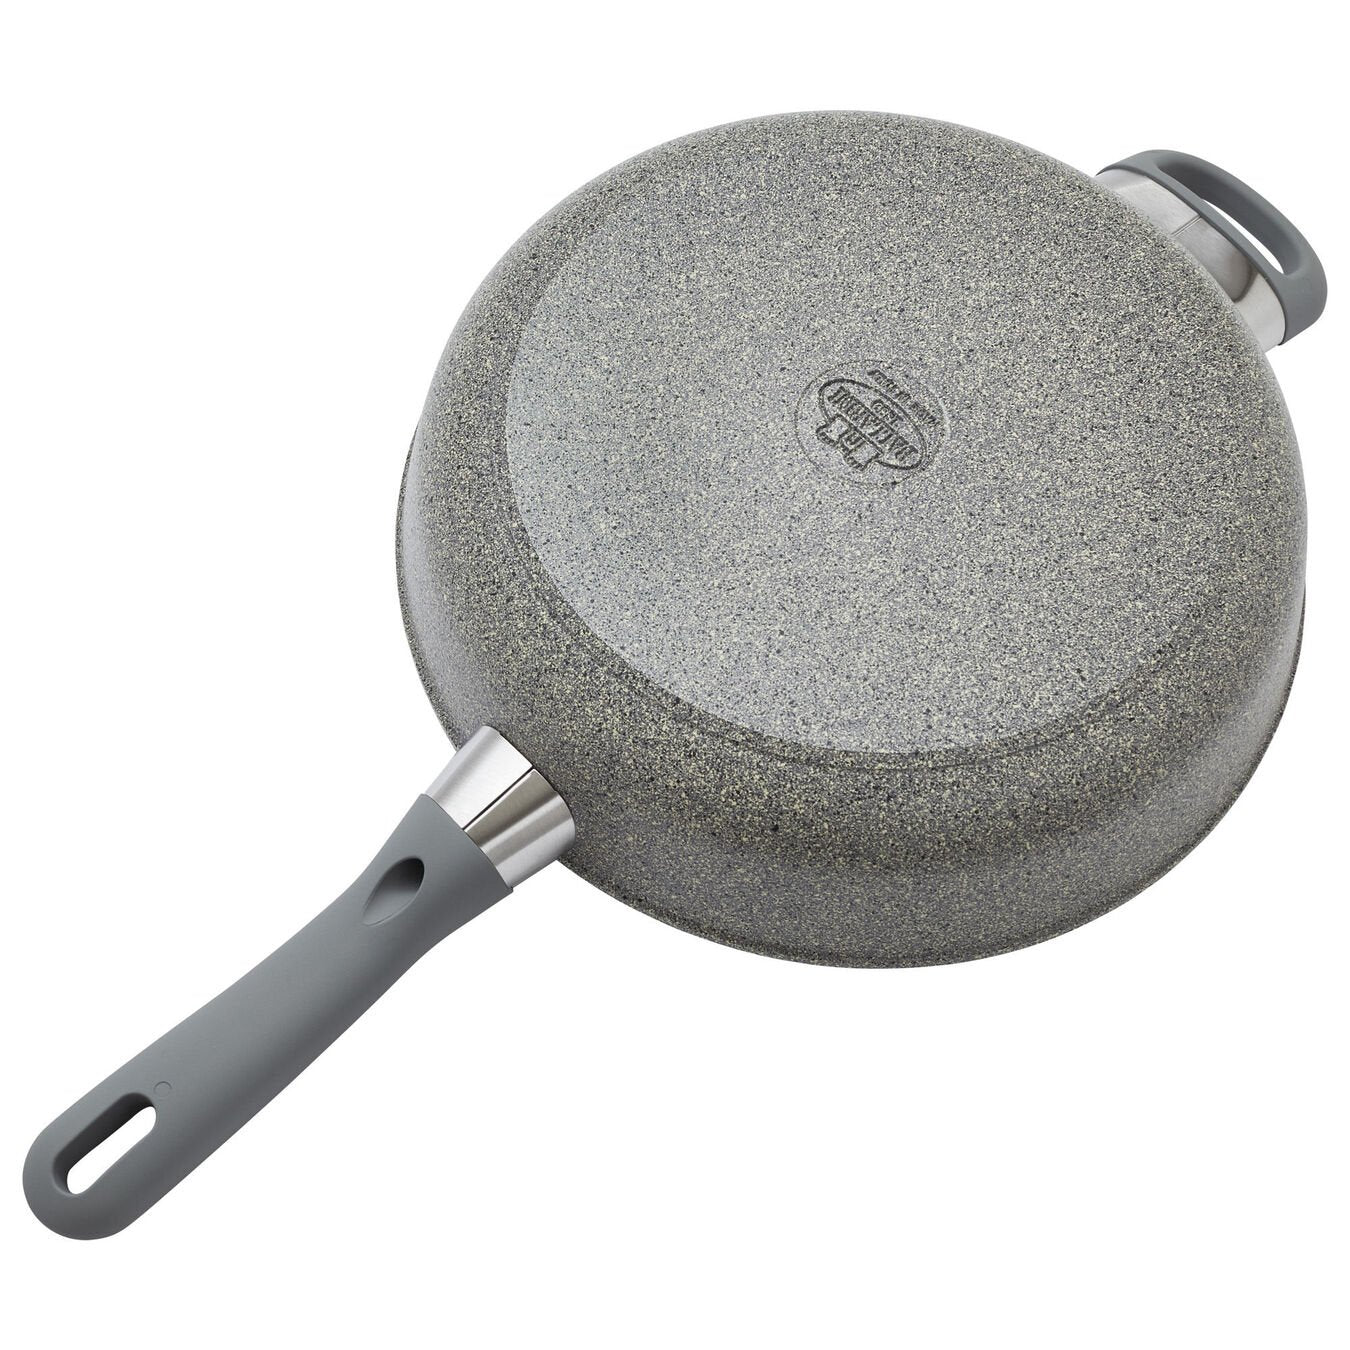 bottom view of saute pan showing logo on white background